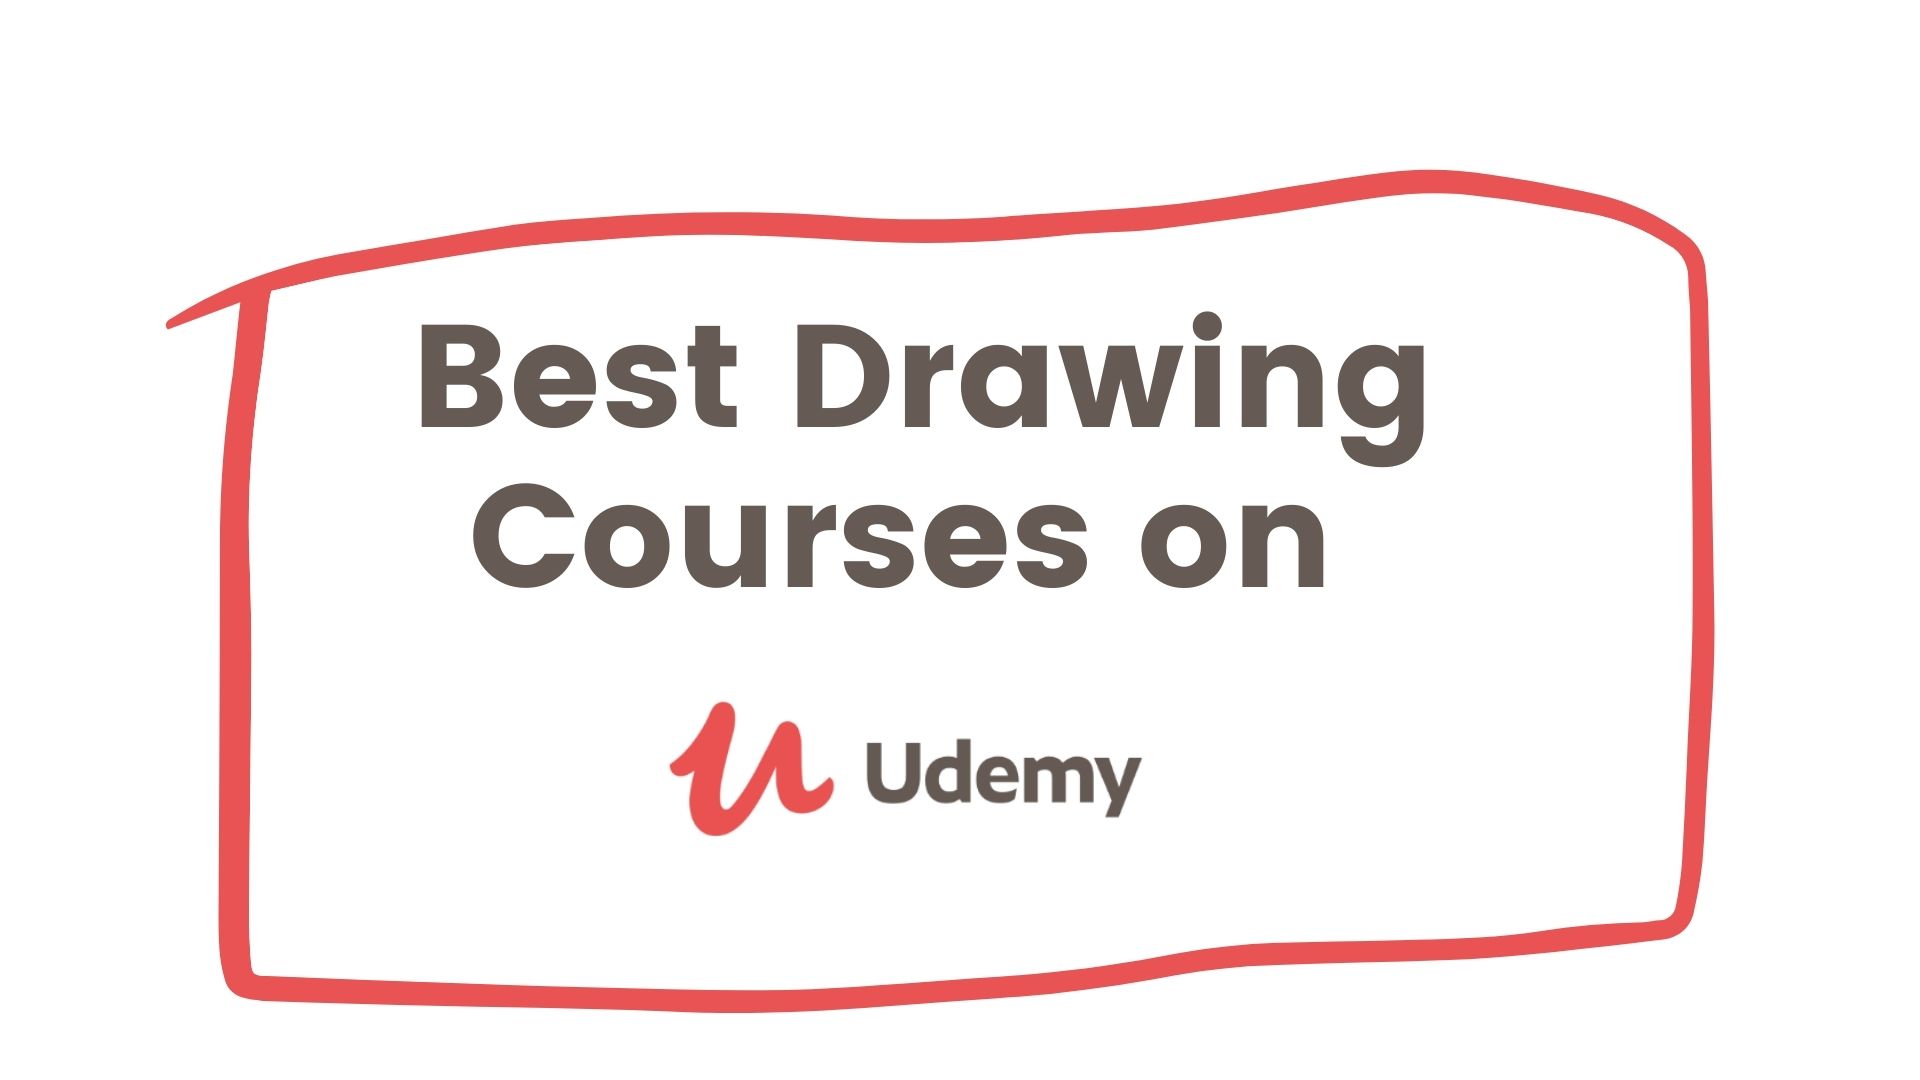 Top 55 Best Drawing Courses on Udemy